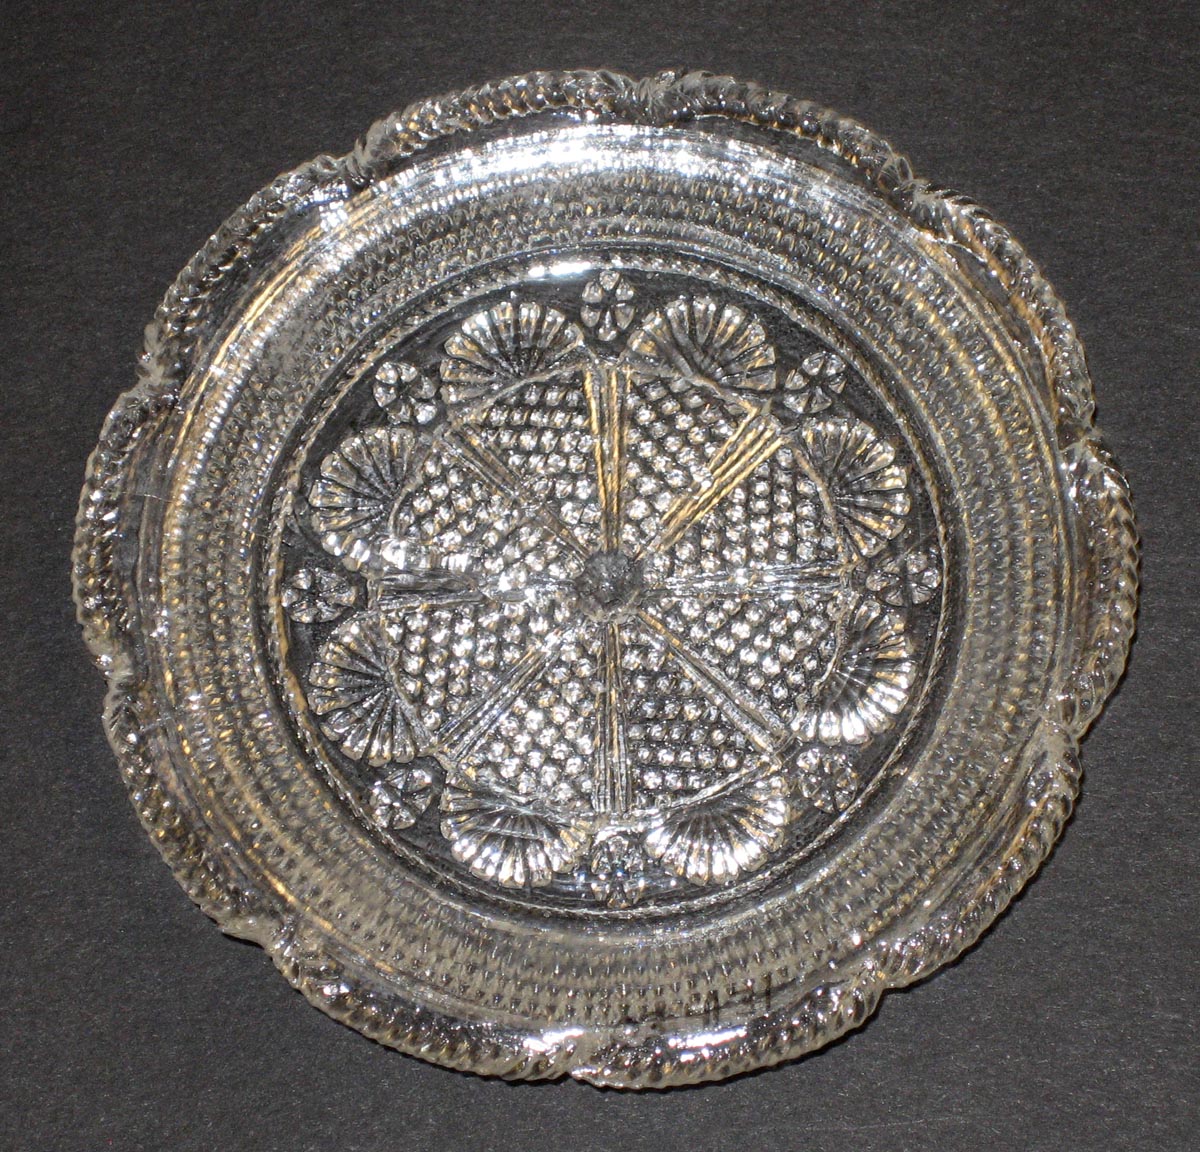 2003.0041.031 Rosette-pattern cup plate